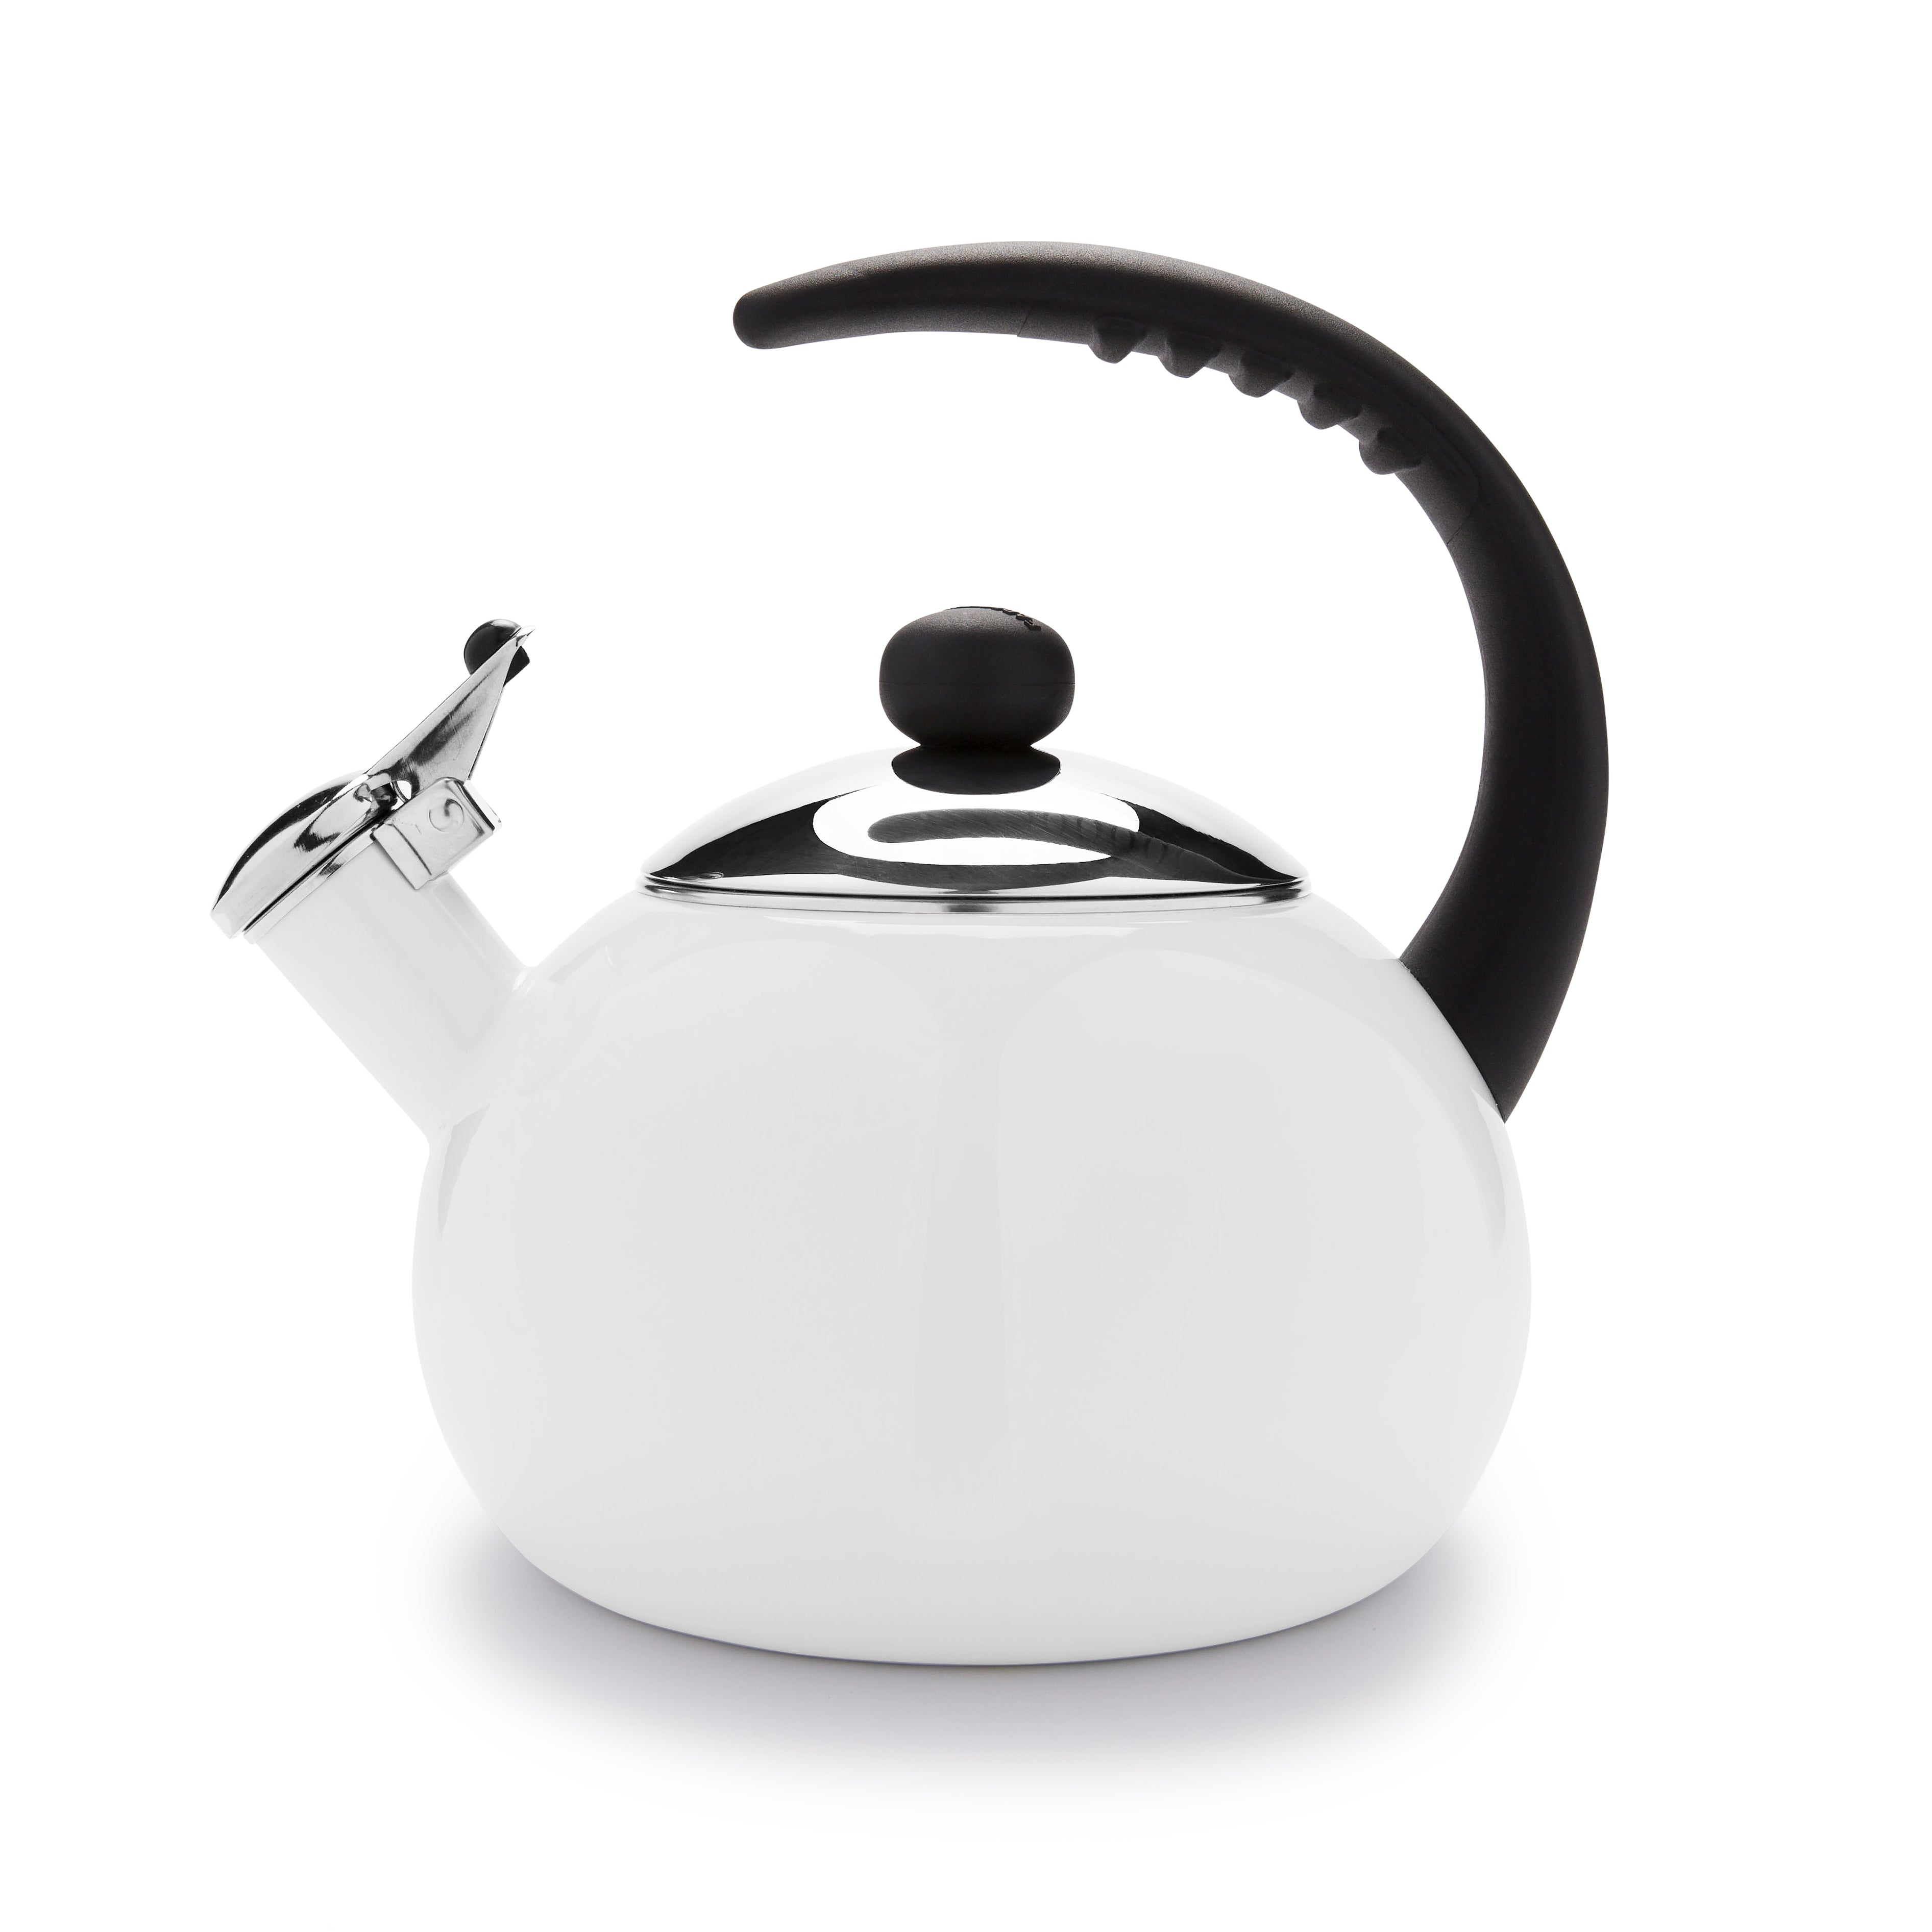 Copco Valencia Brushed Stainless Steel 2.3 Quart Tea Kettle 